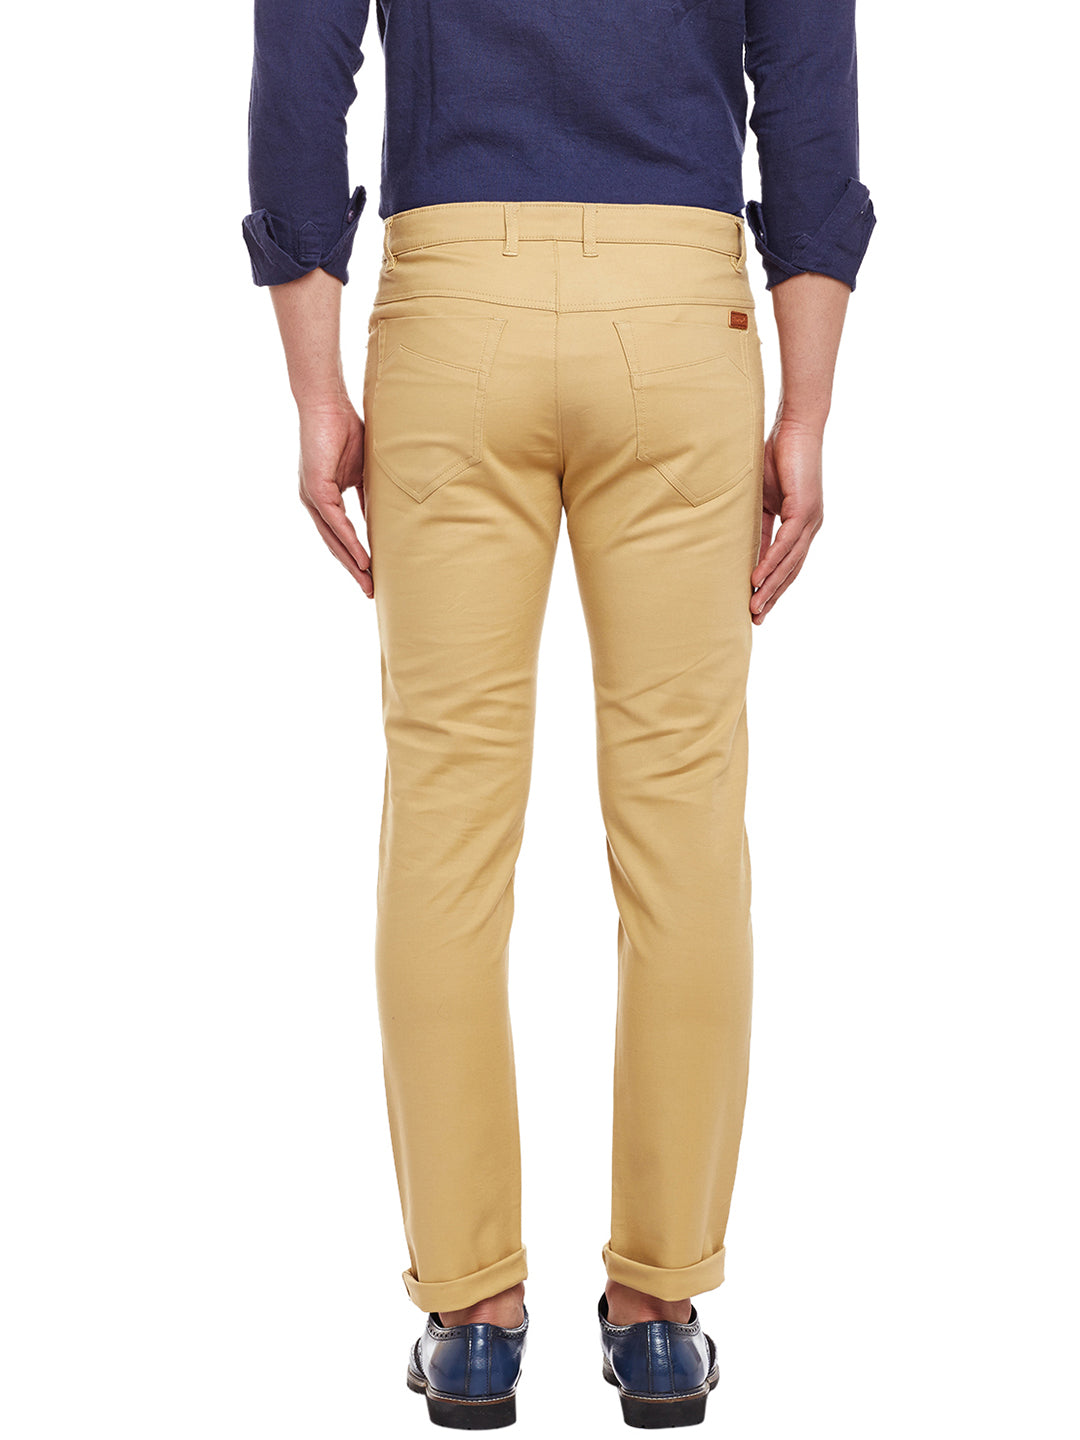 Men Beige Solid  Cotton Stretch Slim Fit Casual Chinos Trouser